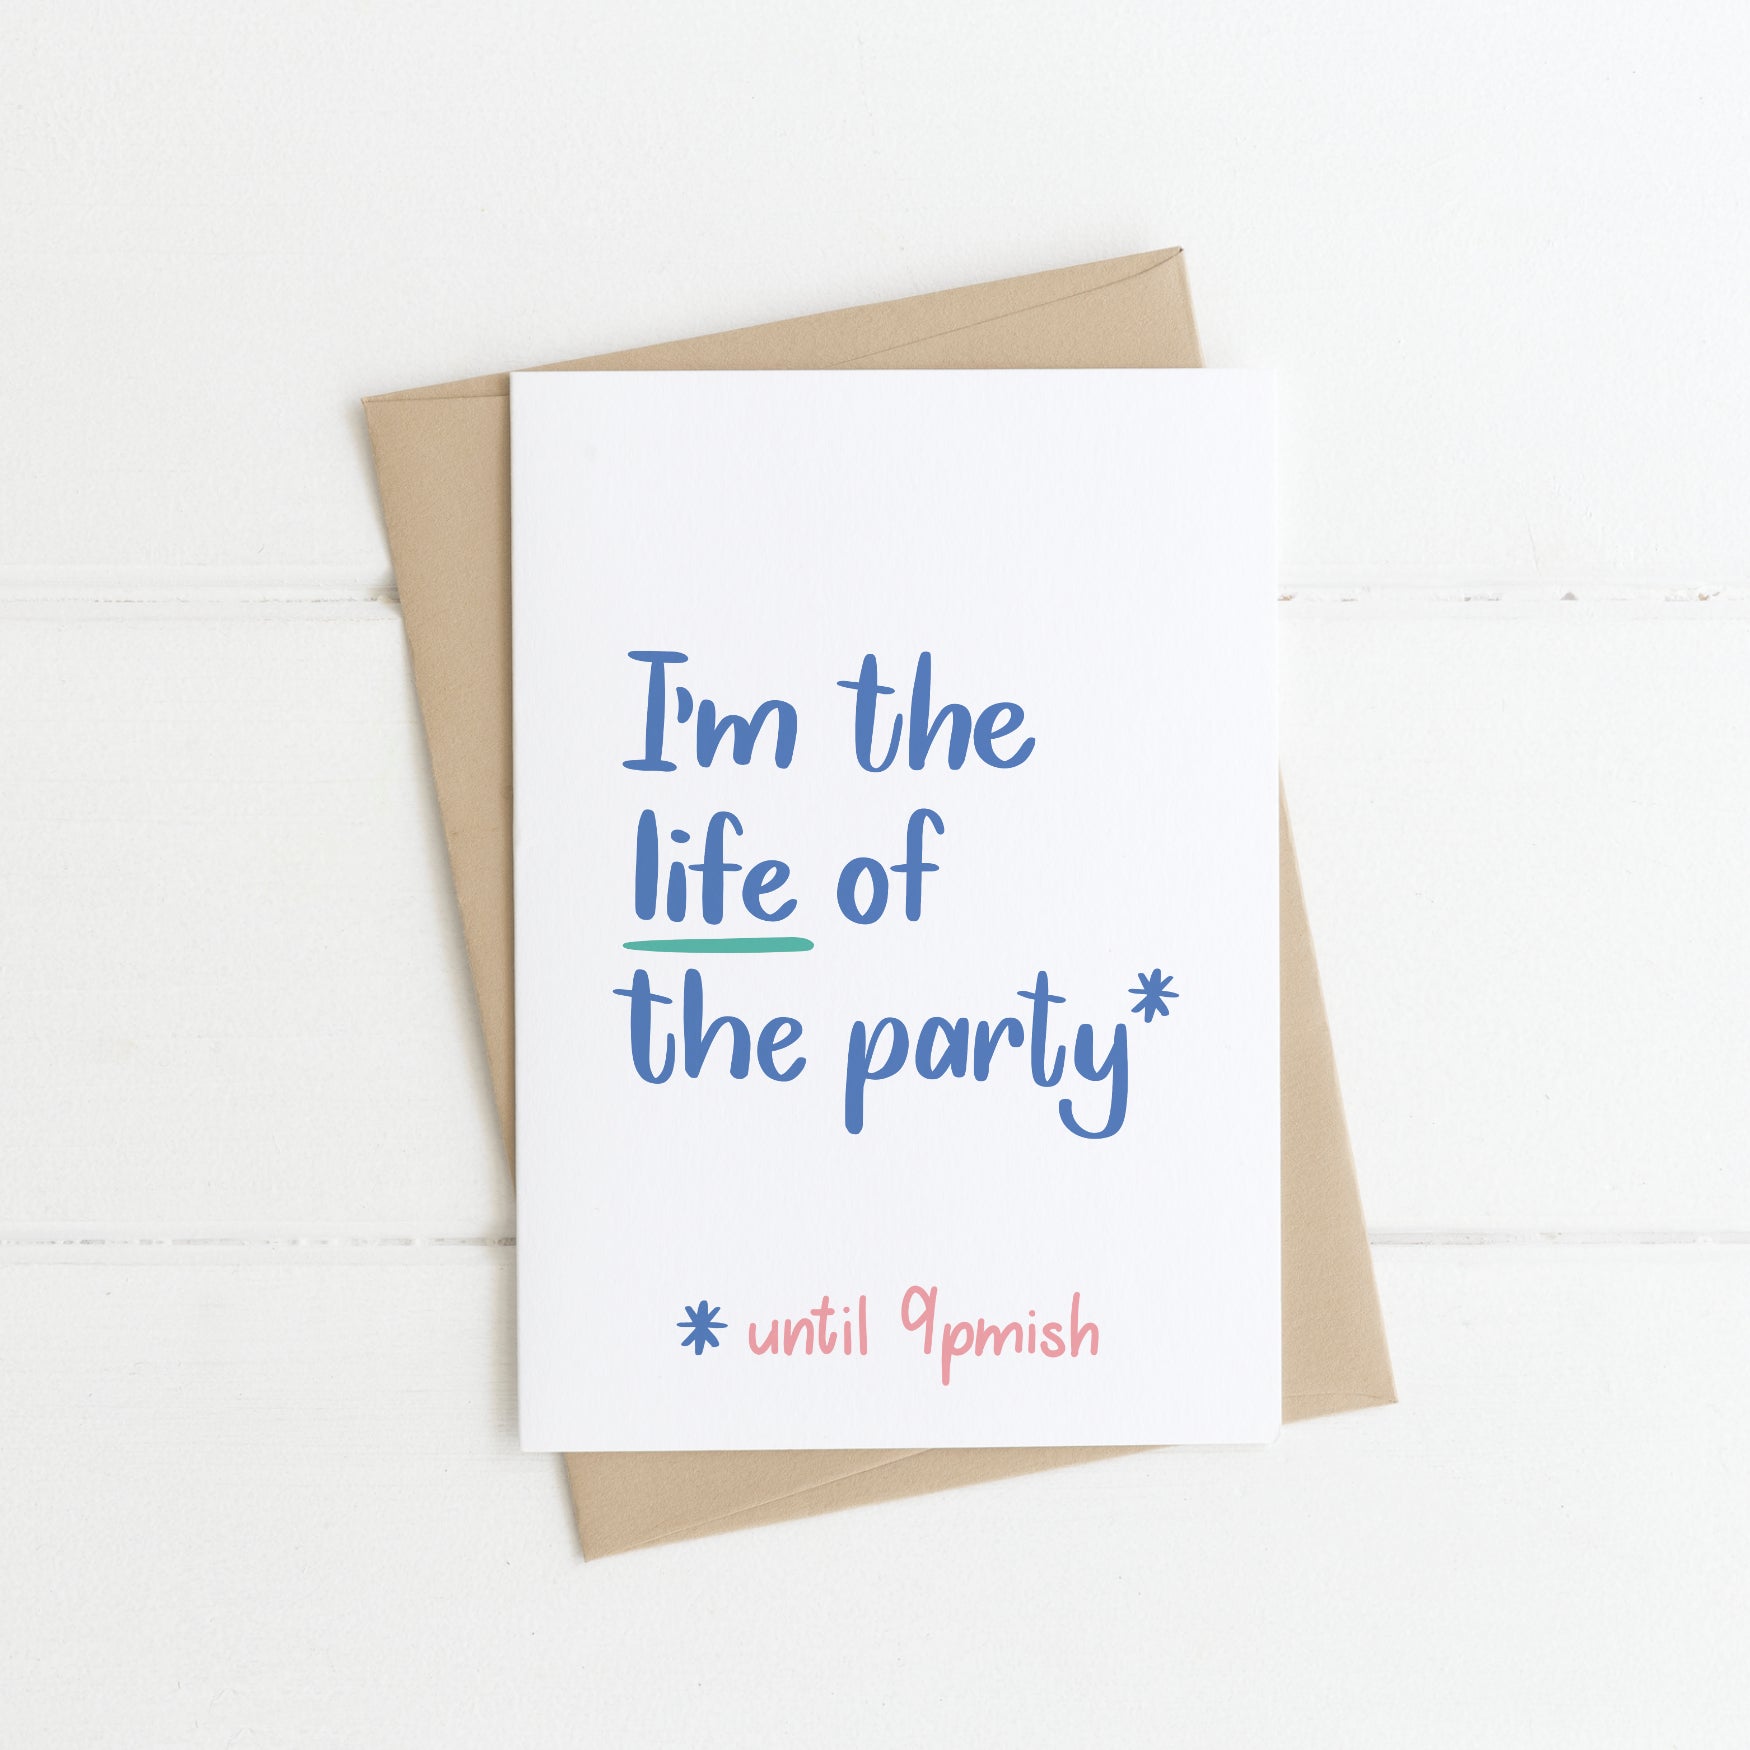 Life of the party till 9pmish Funny Card